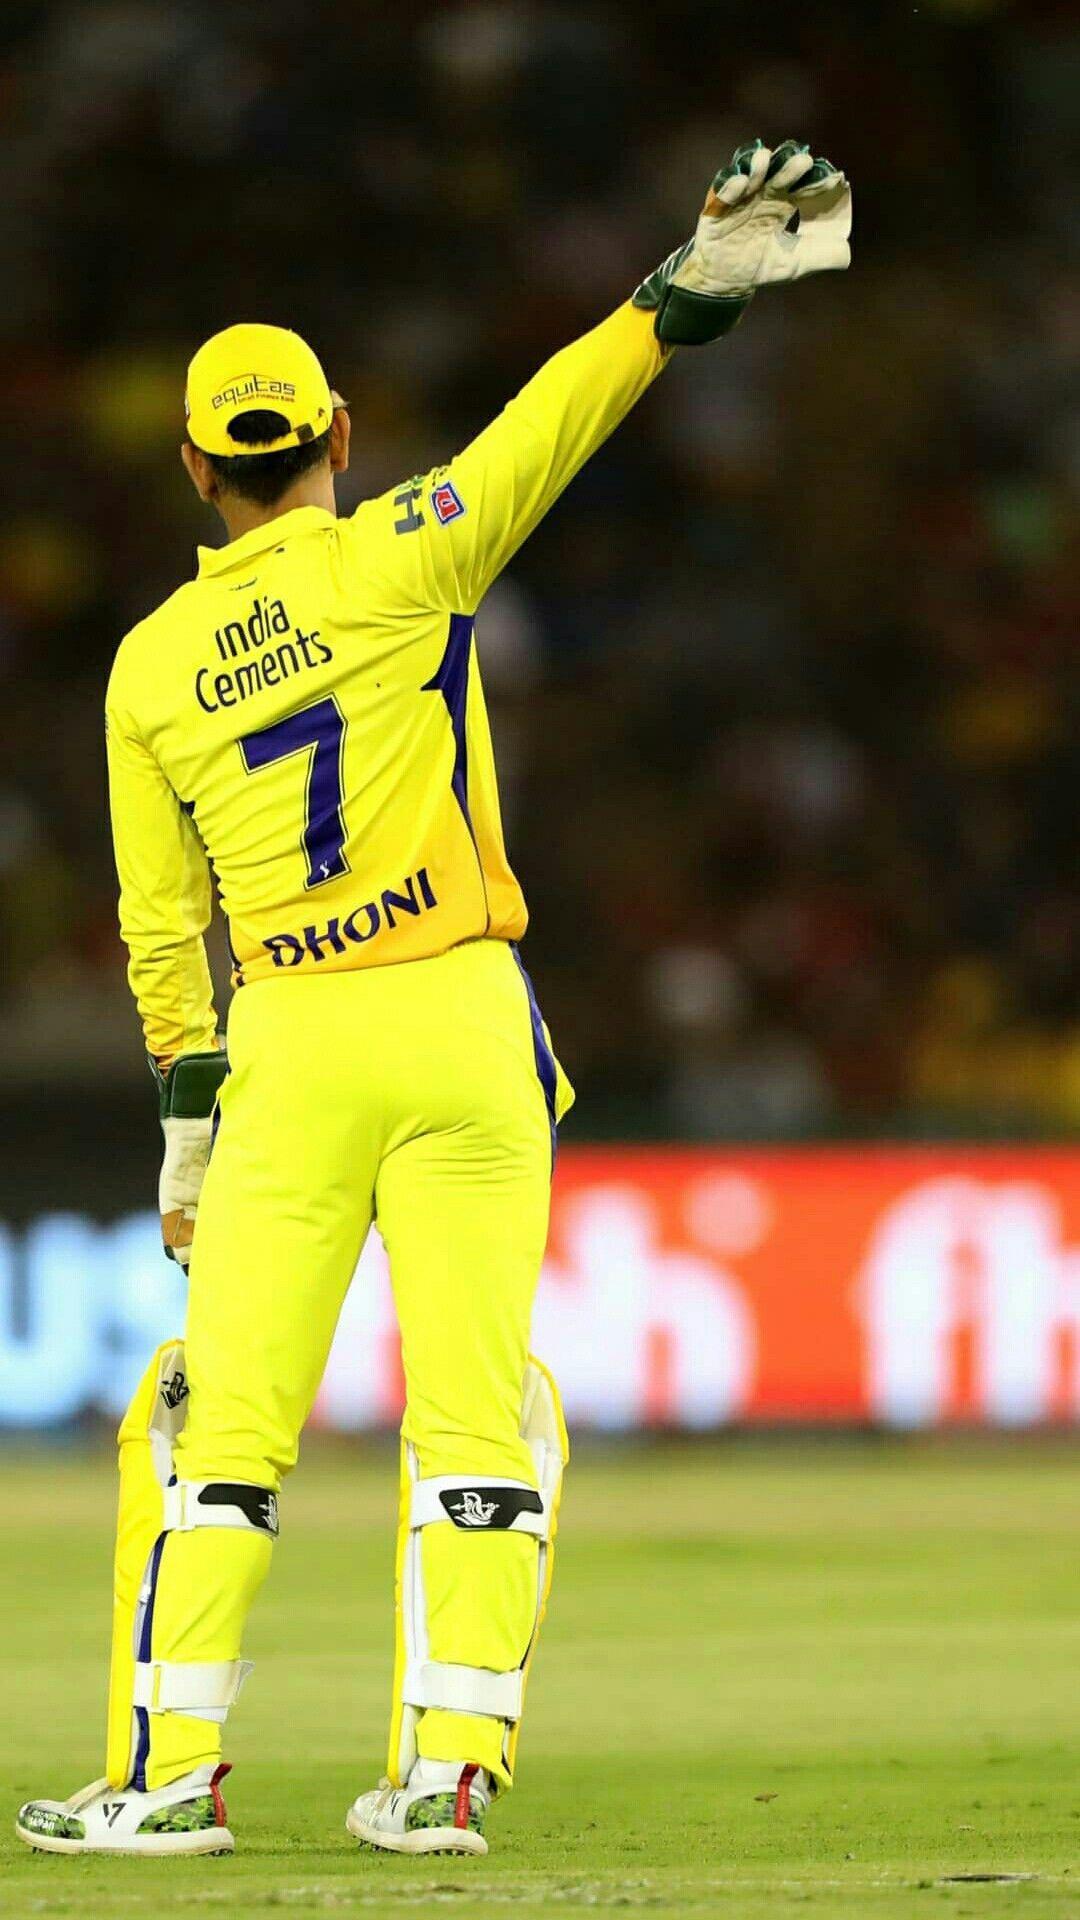 Csk Wallpaper HD Resolution For Your Android or iPhone Wallpaper #android #iphone #wallpaper. Dhoni wallpaper, Ms dhoni wallpaper, Ms dhoni photo